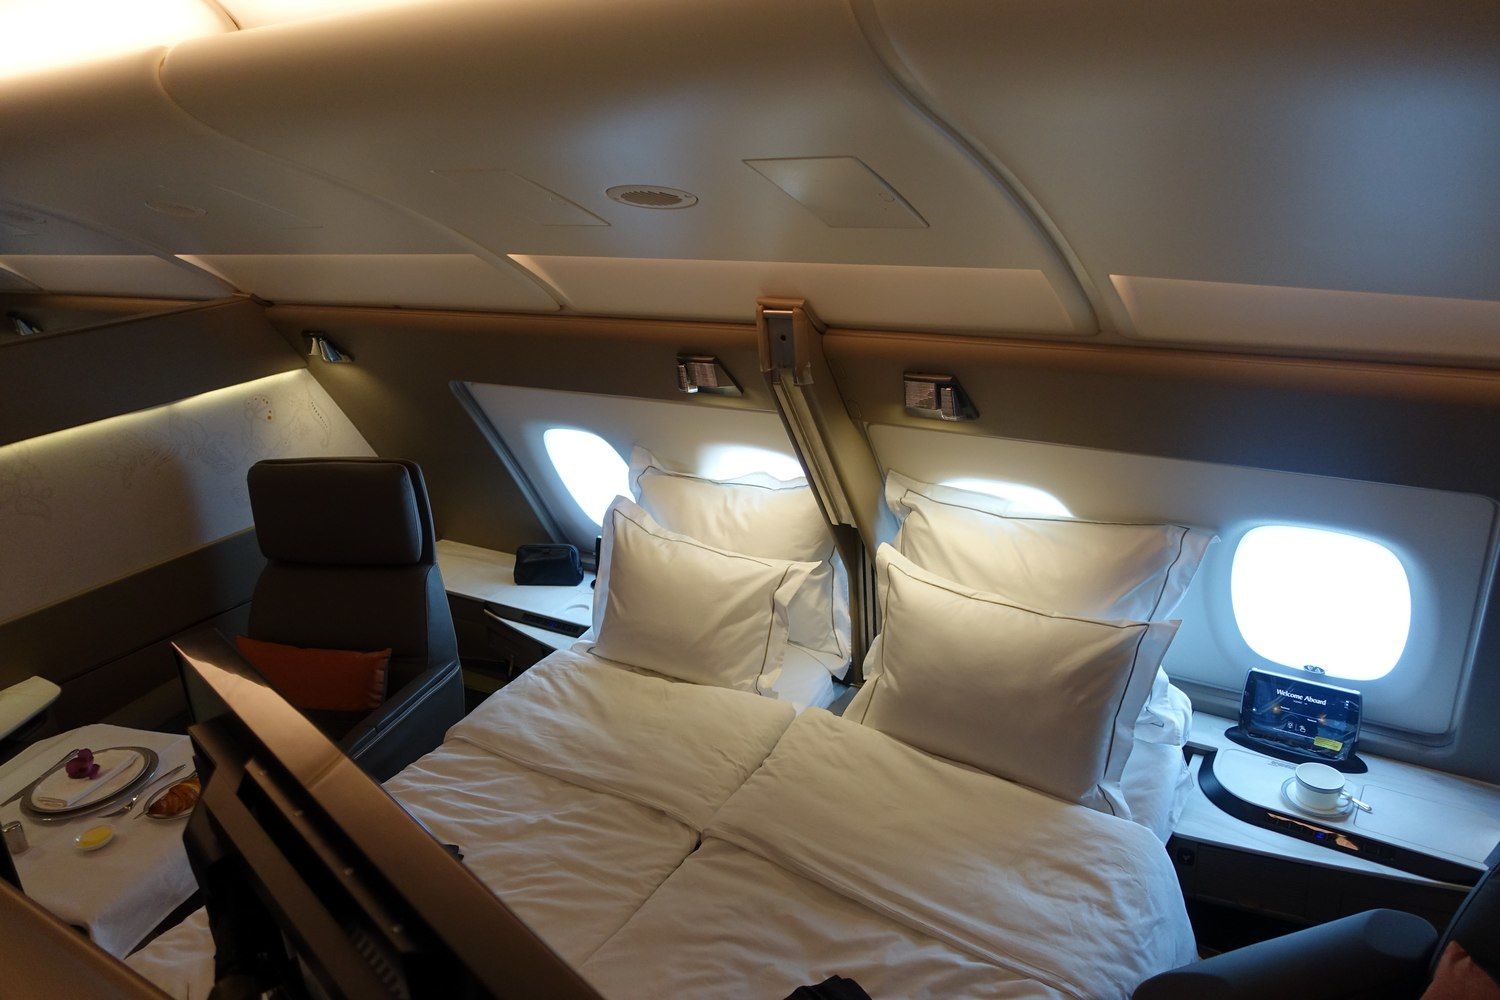 Singapore Airlines' new A380 First Class Seat